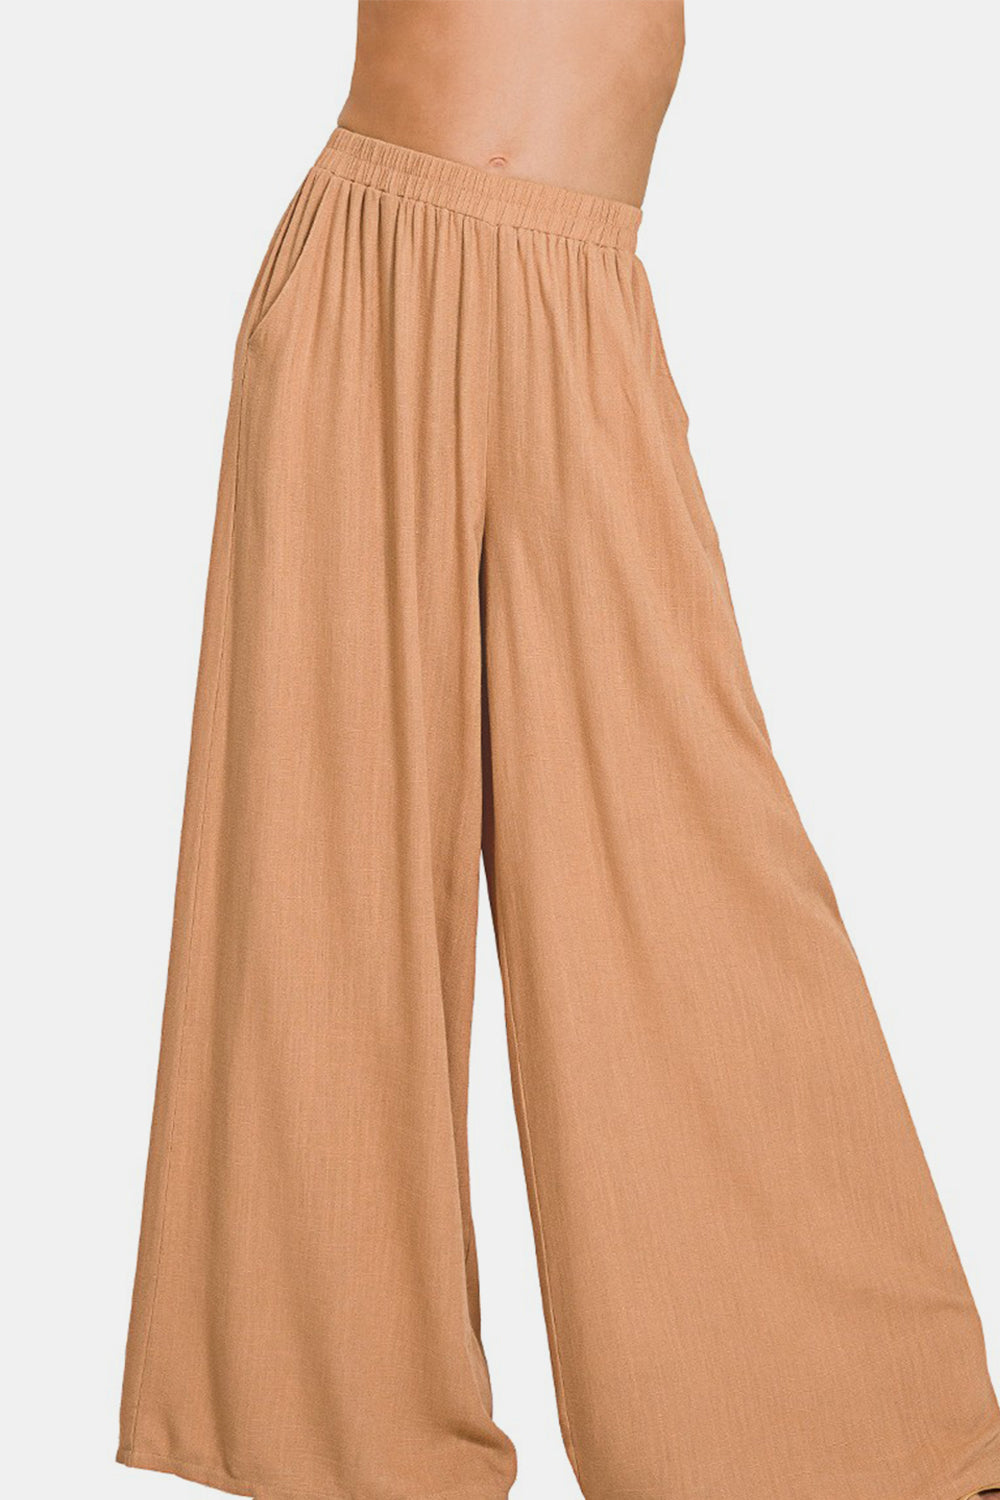 Zenana Pleated Linen Blend Wide Leg Pants in Dark Brush Southern Soul Collectives